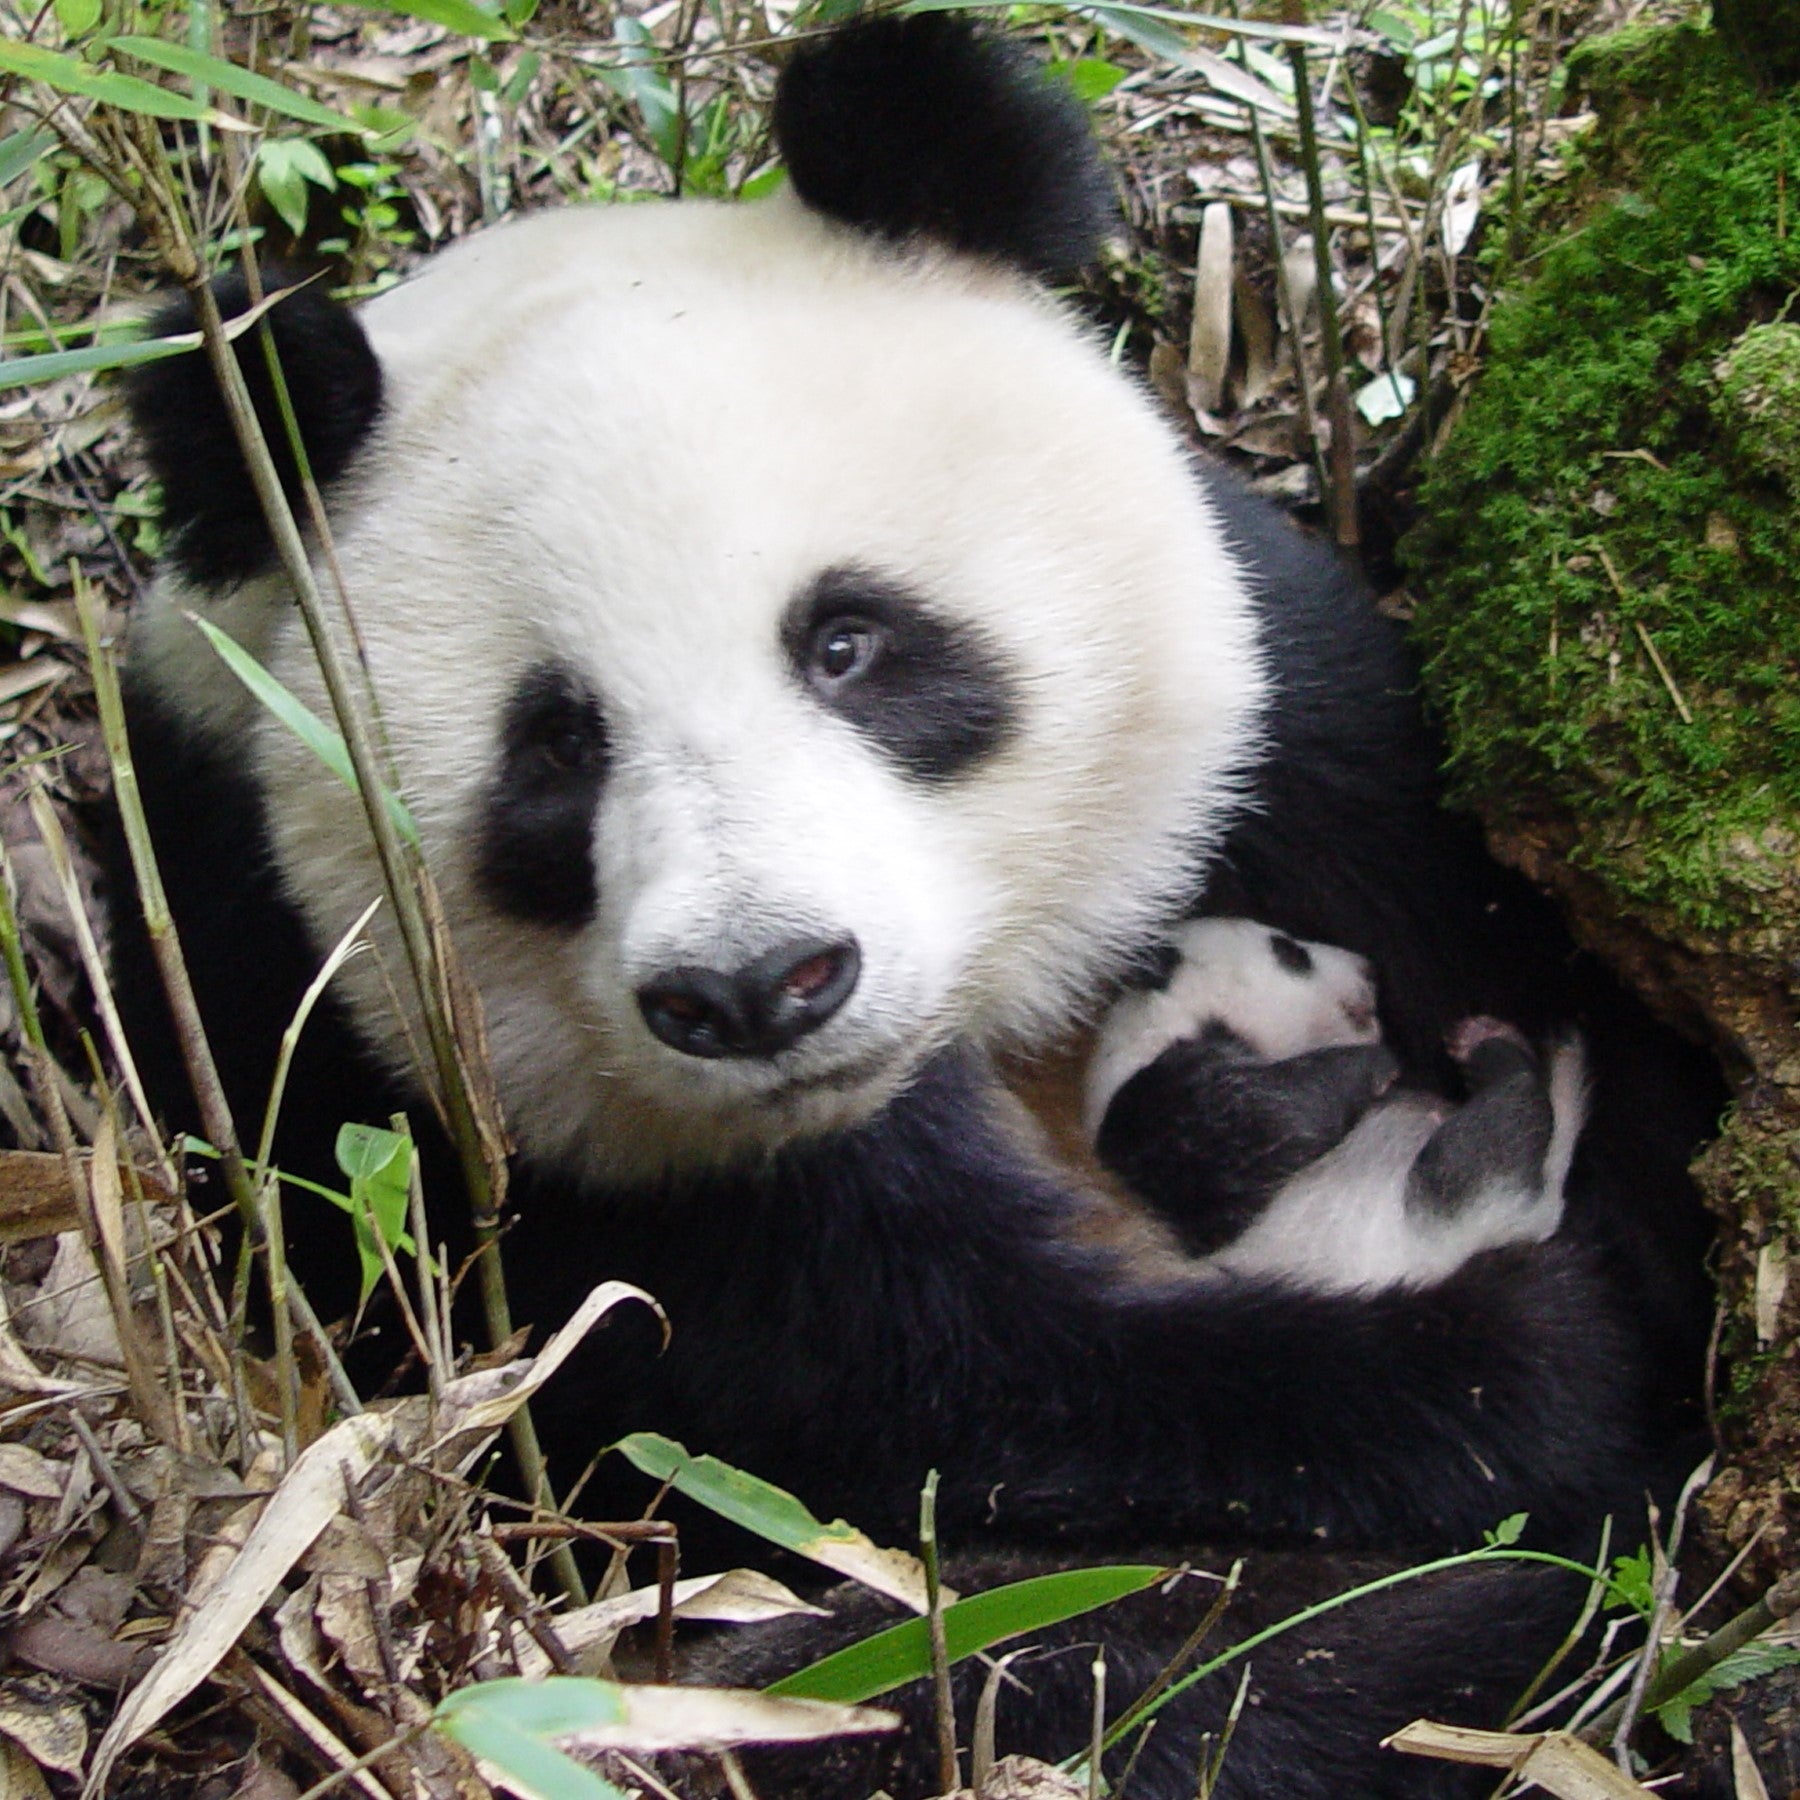 A picture of a giant panda mother holding her cub